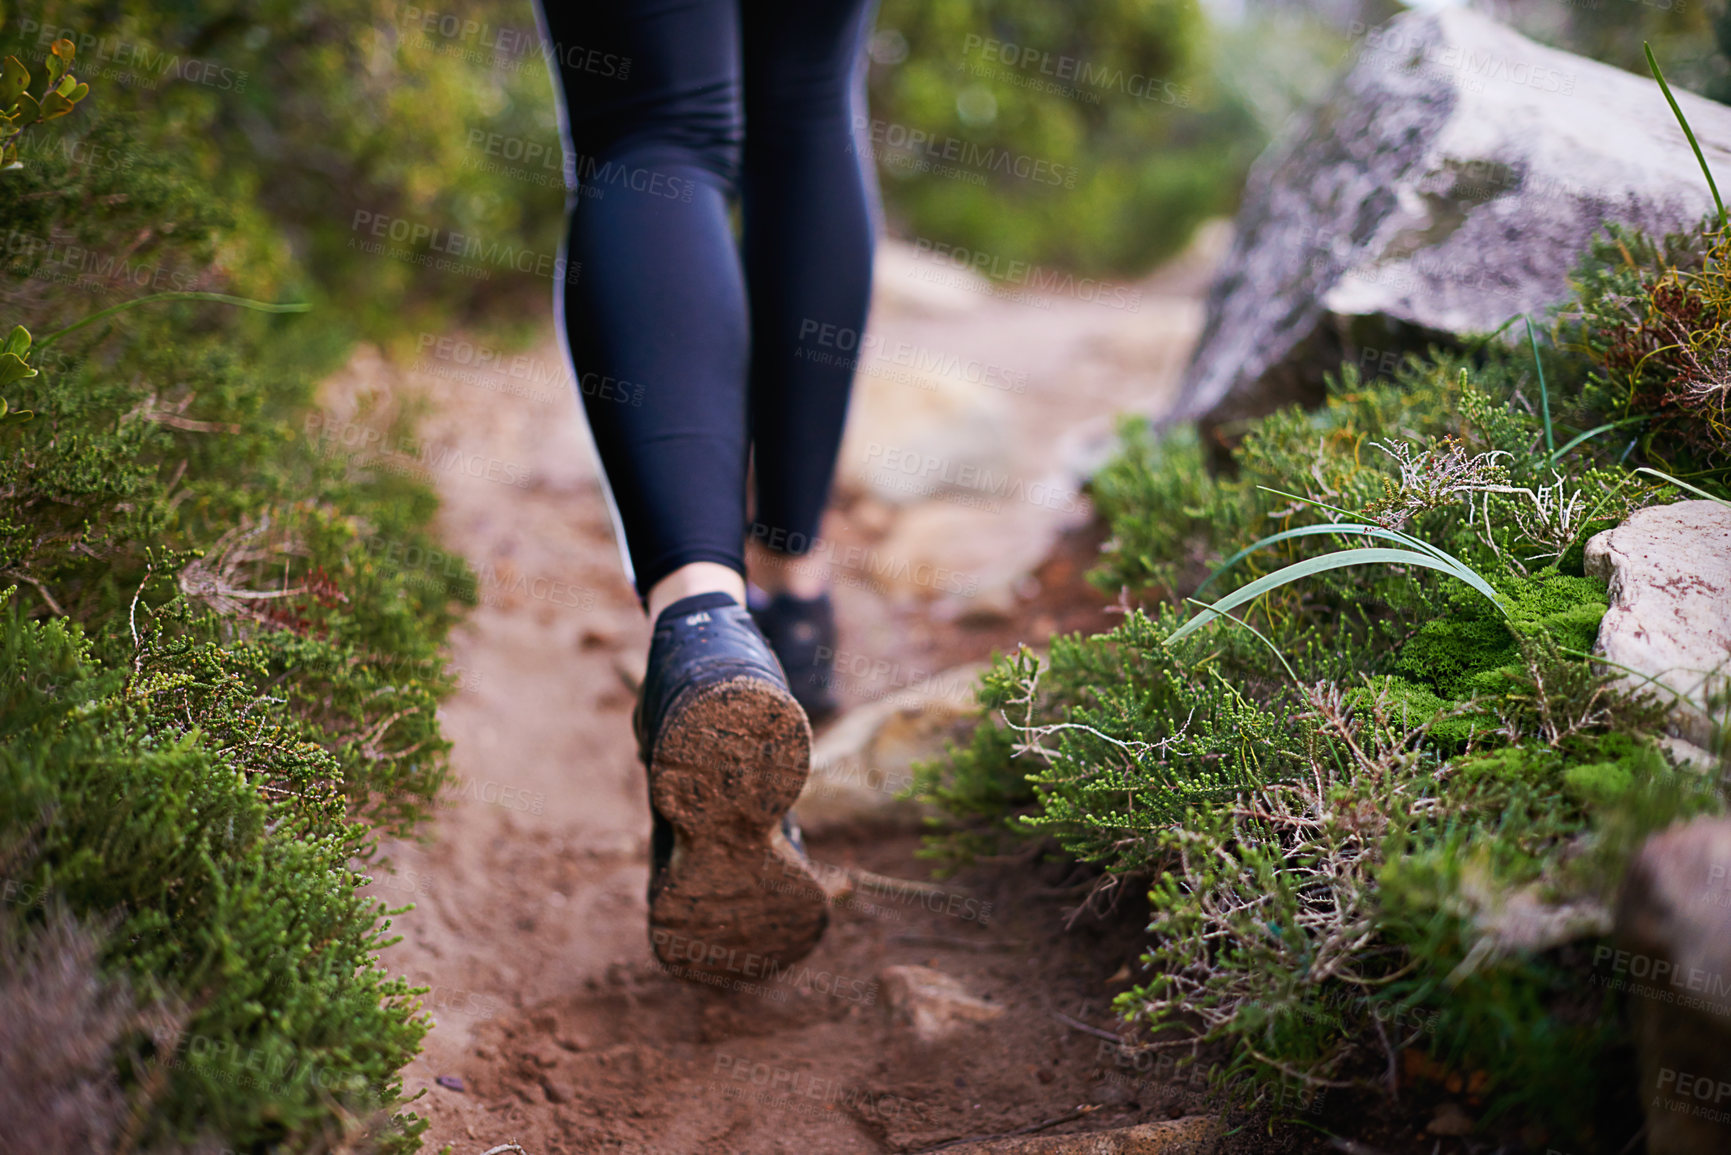 Buy stock photo Closeup shot of the legs of a woman hiking a long a trail